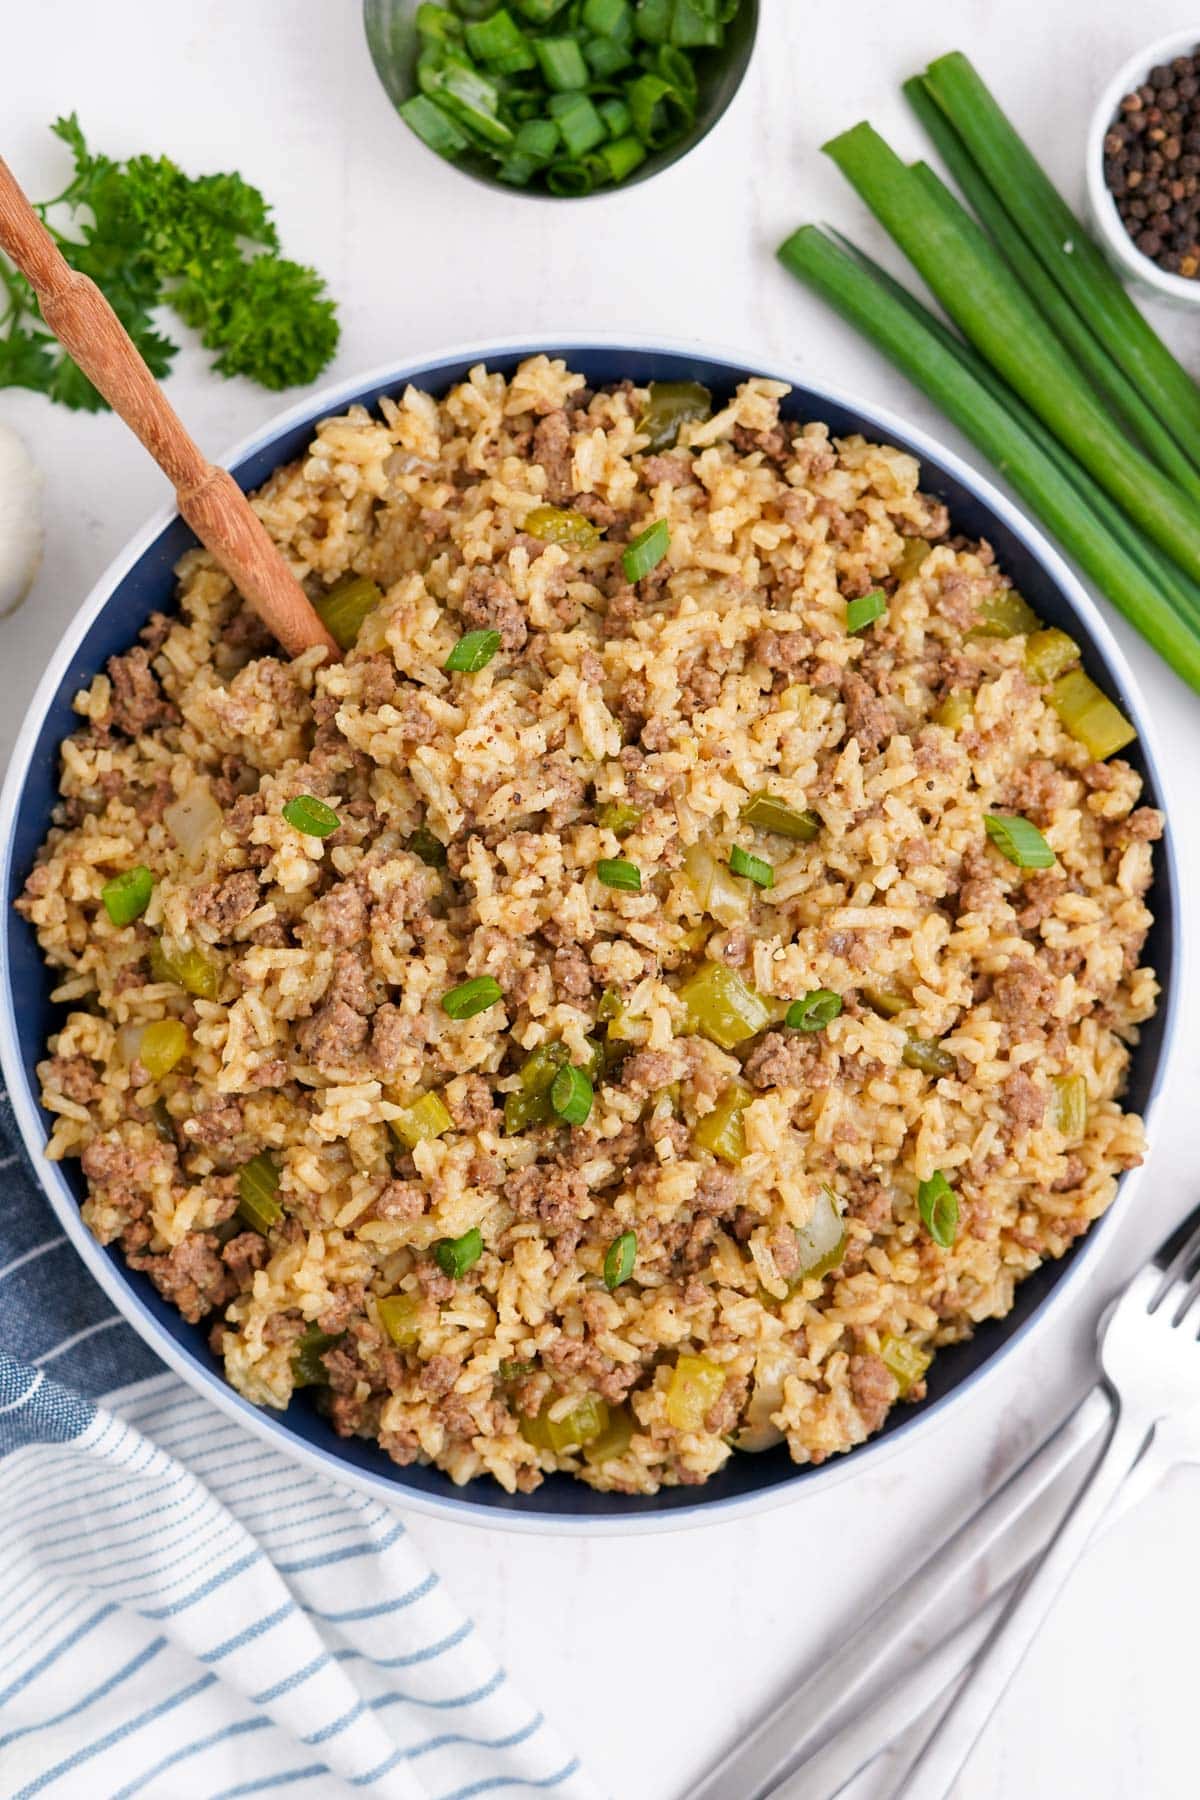 Pan of rice with ground beef and peppers.